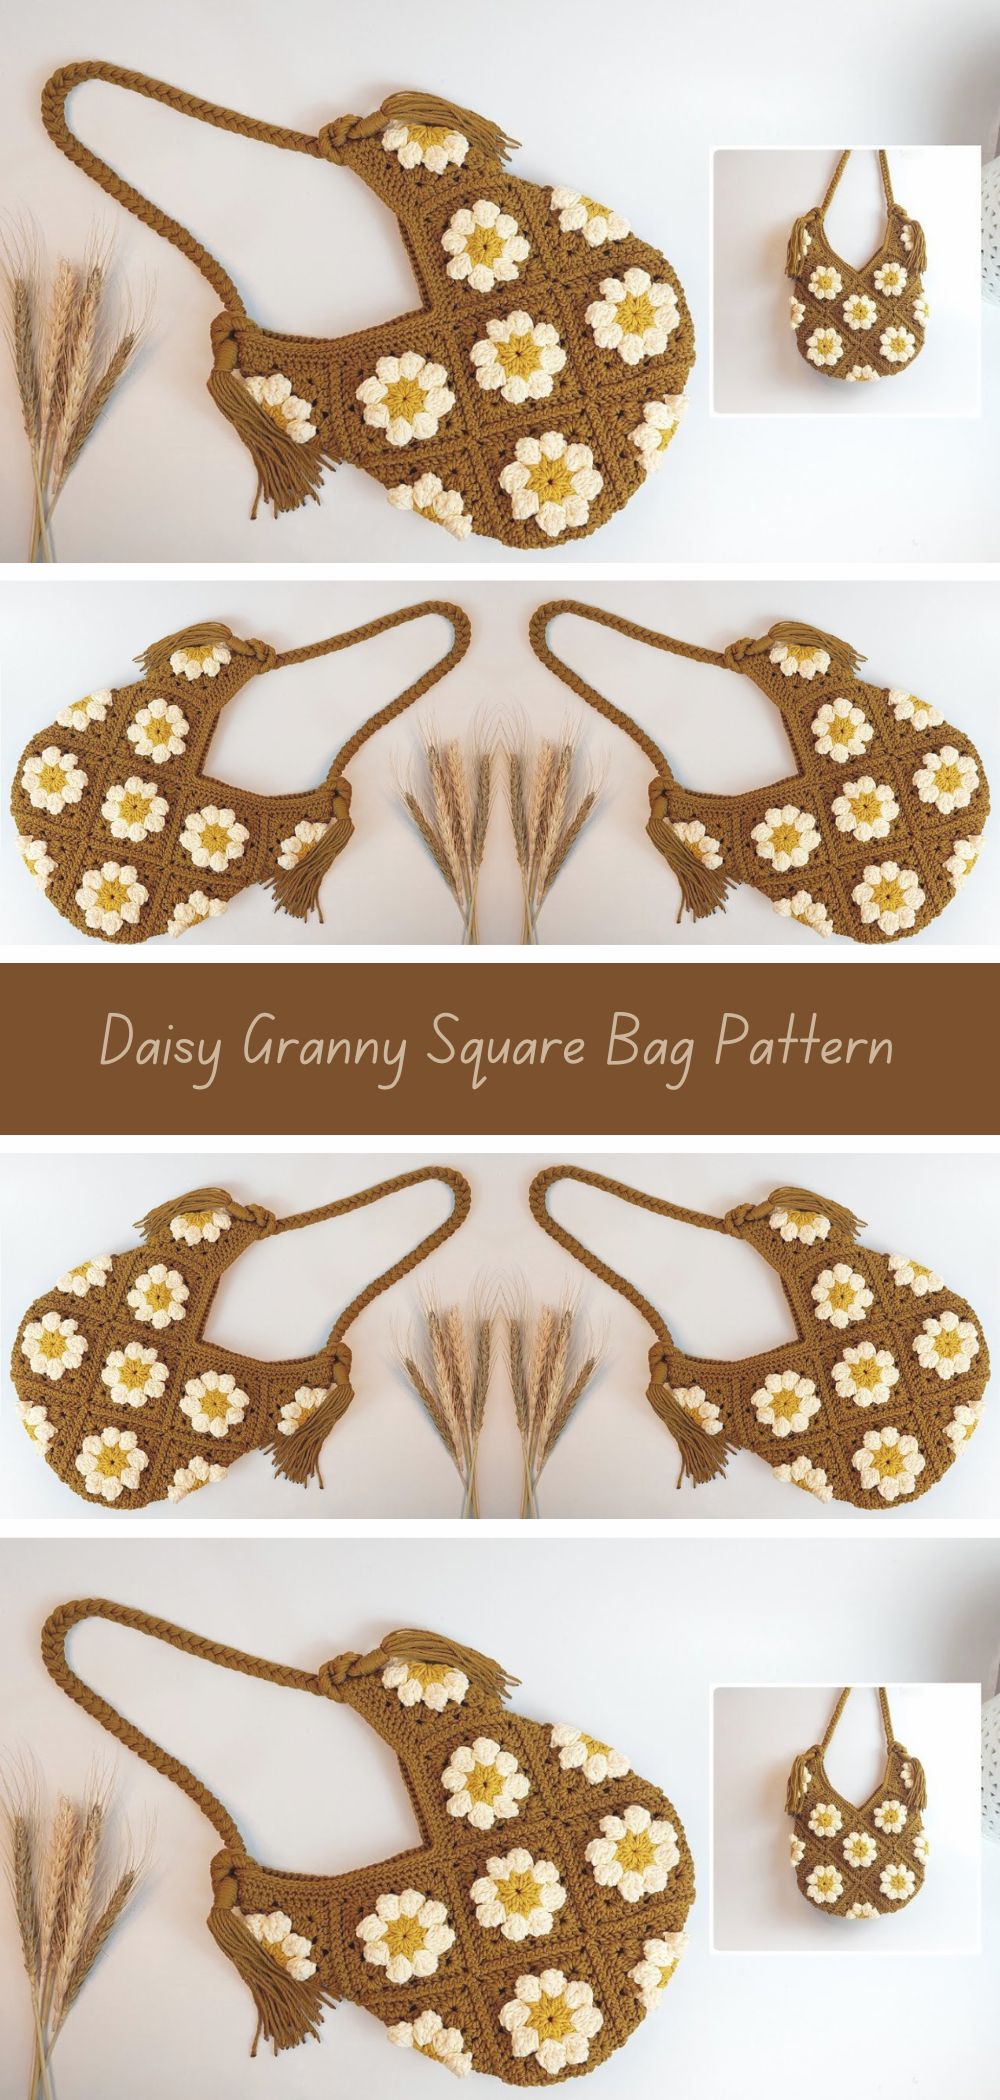 Daisy Granny Square Bag Crochet Pattern - Create a stylish and functional bag adorned with delightful daisy motifs with this charming crochet pattern